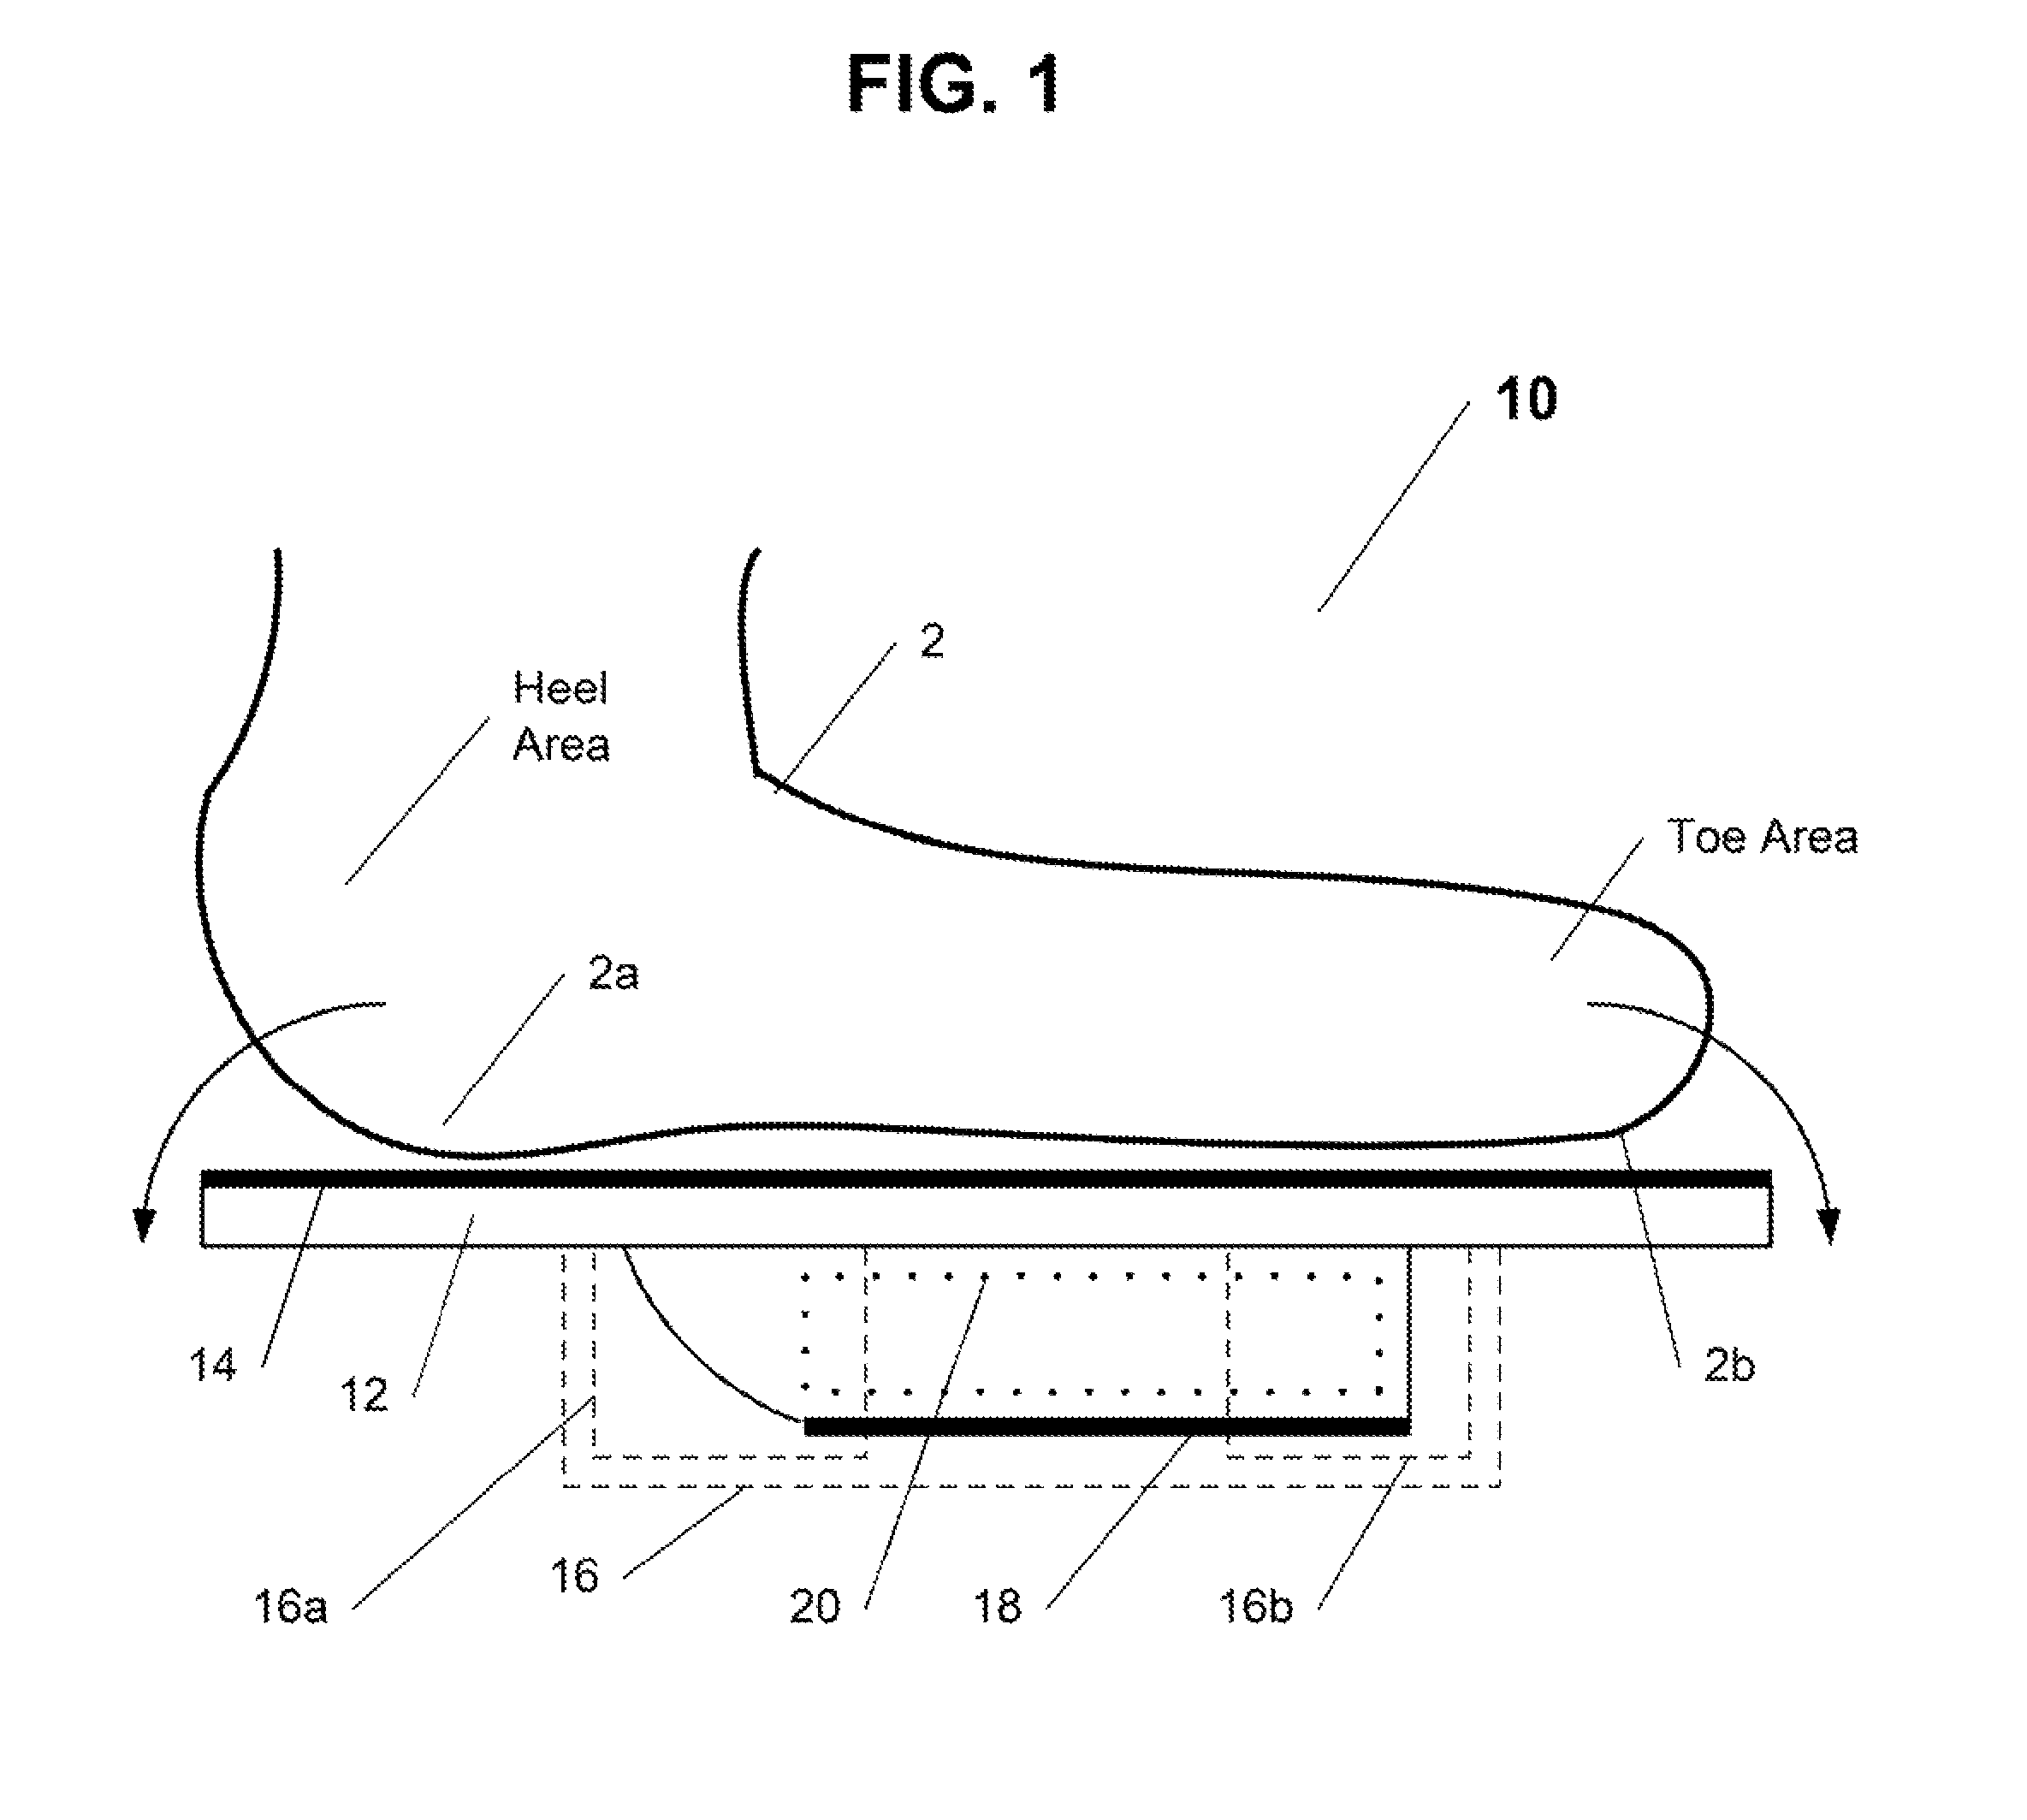 Configurable foot-operable electronic control interface apparatus and method